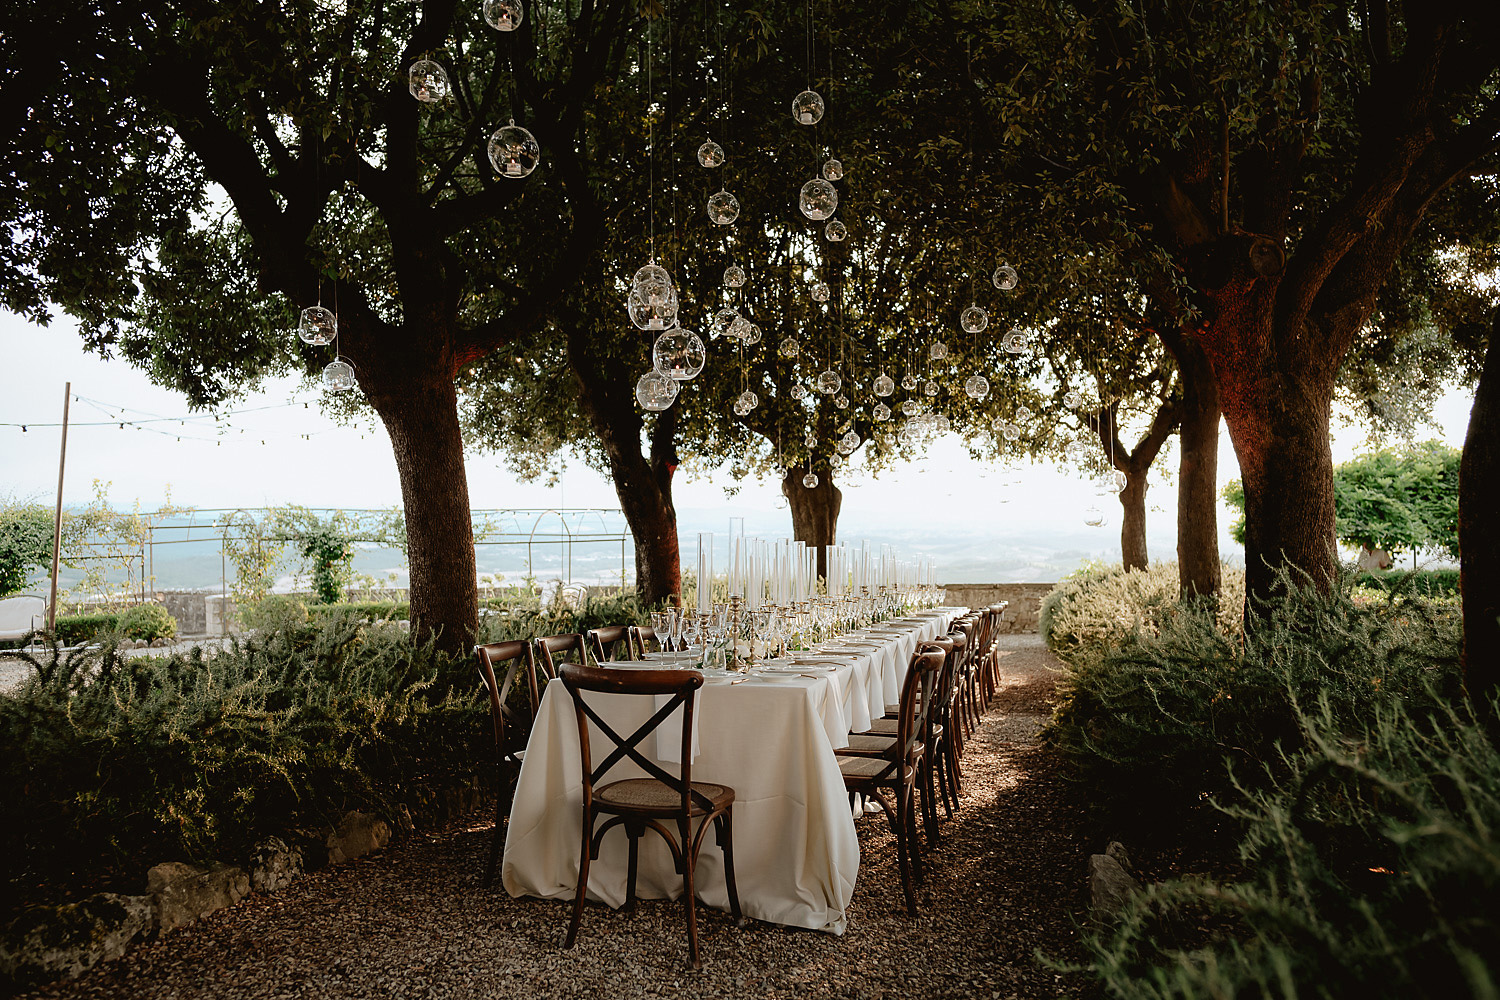 editiorial intimate micro wedding in tuscany family formals